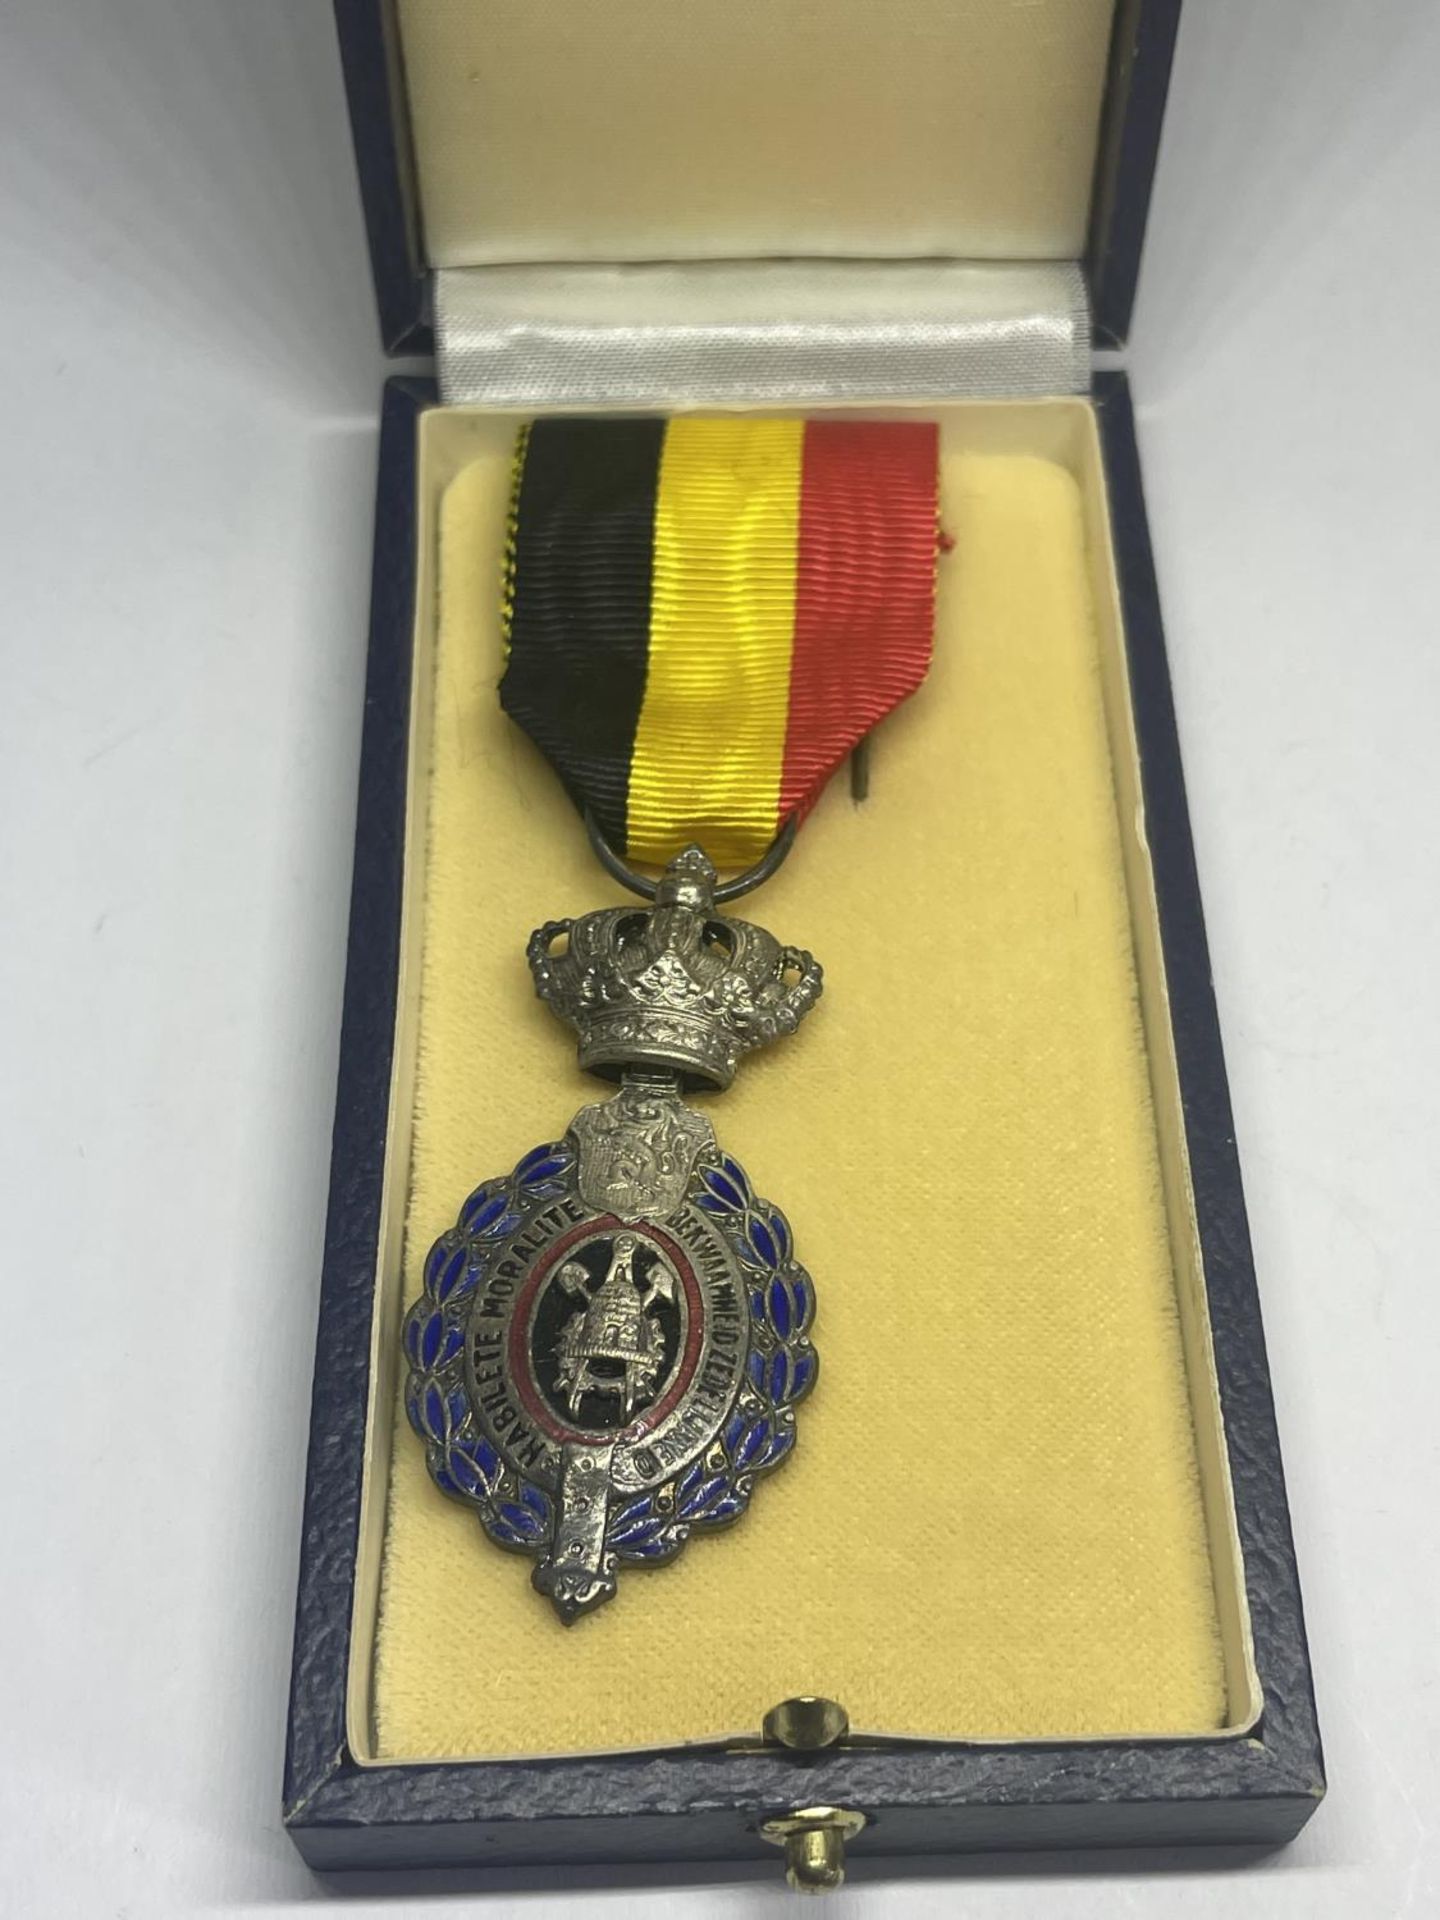 A FRENCH MEDAL IN A PRESENTATION BOX - Image 2 of 3